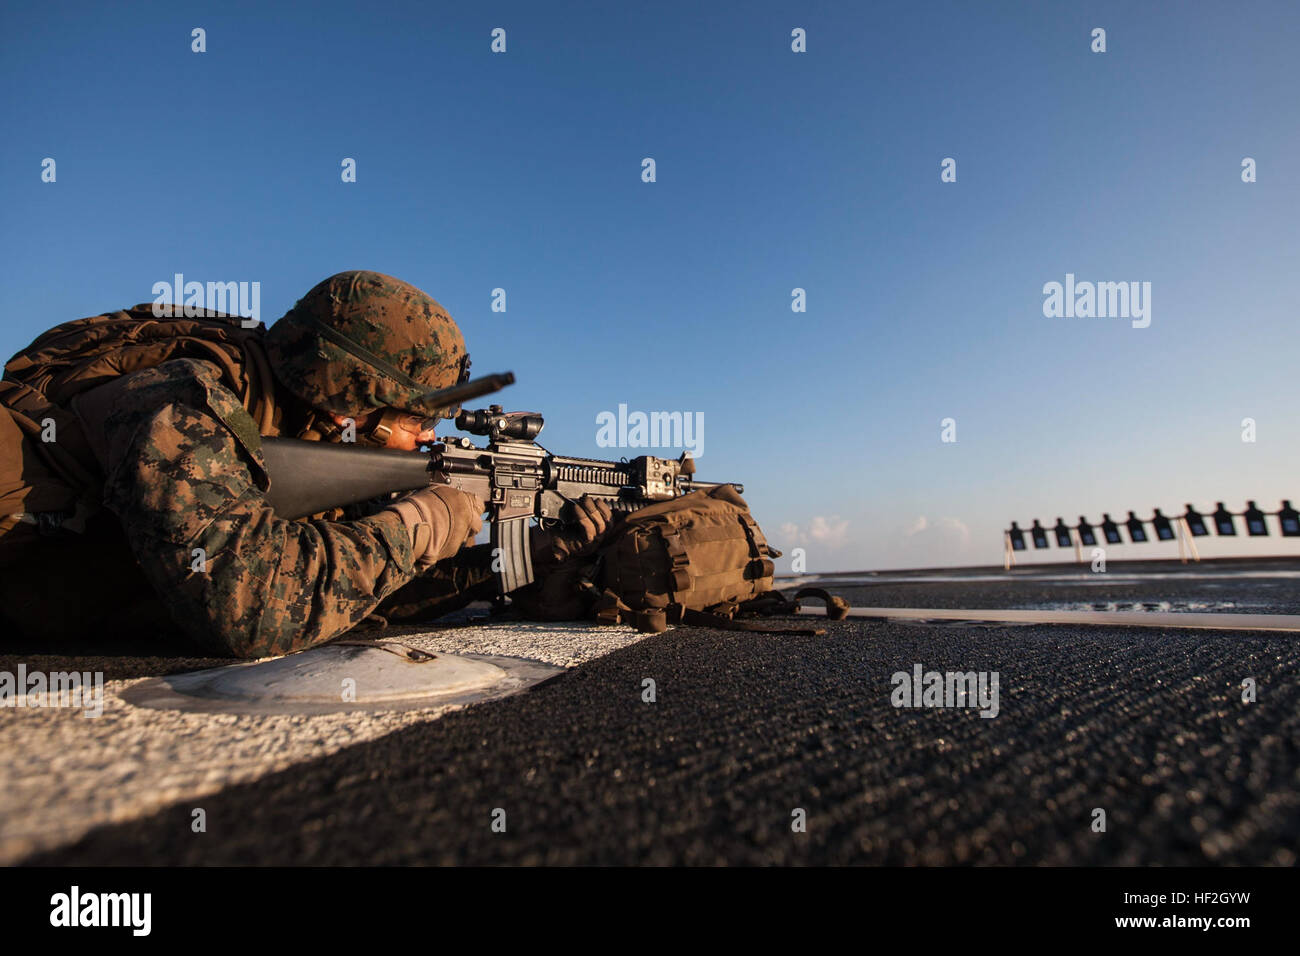 Corporal Carlos Eduardothen, an infantryman with Company L, Battalion Landing Team 3rd Battalion, 5th Marines, 31st Marine Expeditionary Unit, and a native of Perth Amboy, New Jersey, engages a target during a deck shoot on the USS Germantown (LSD-42). The 31st MEU/USS Peleliu (LHA-5) Amphibious Ready Group is executing Certification Exercise in preperation for Fall Patrol of the Asia-Pacific region. (U.S. Marine photo by Cpl. Henry Antenor) 31st MEU Fall Patrol 2014 CERTEX 140926-M-FX659-227 Stock Photo